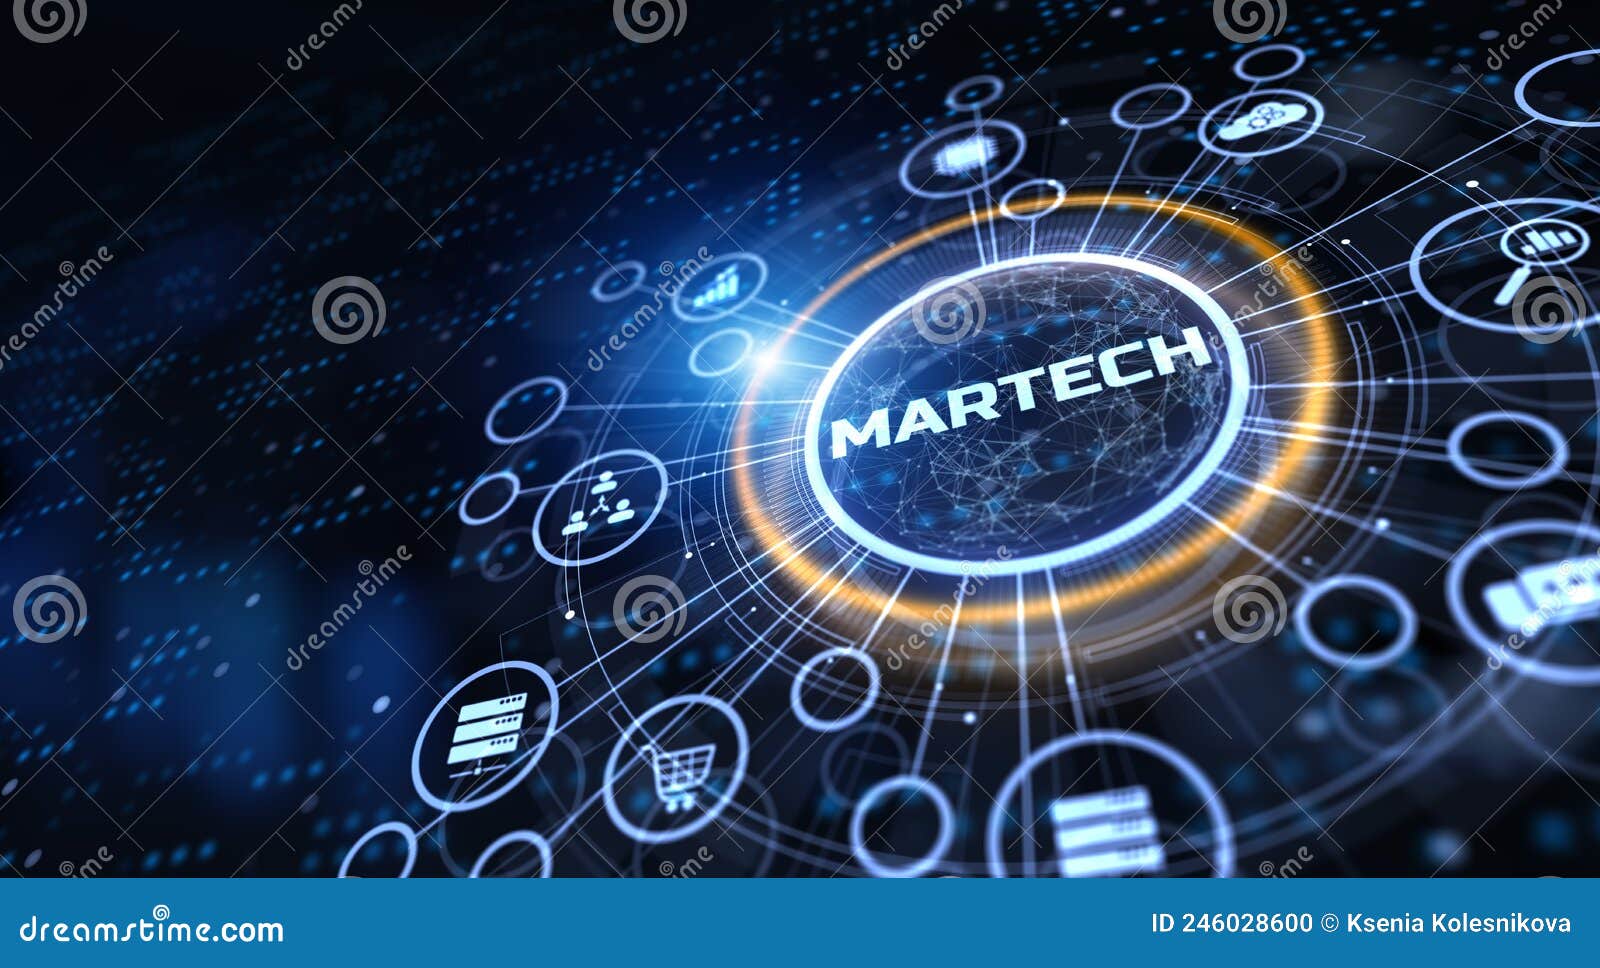 martech marketing technology automation concept on virtual screen